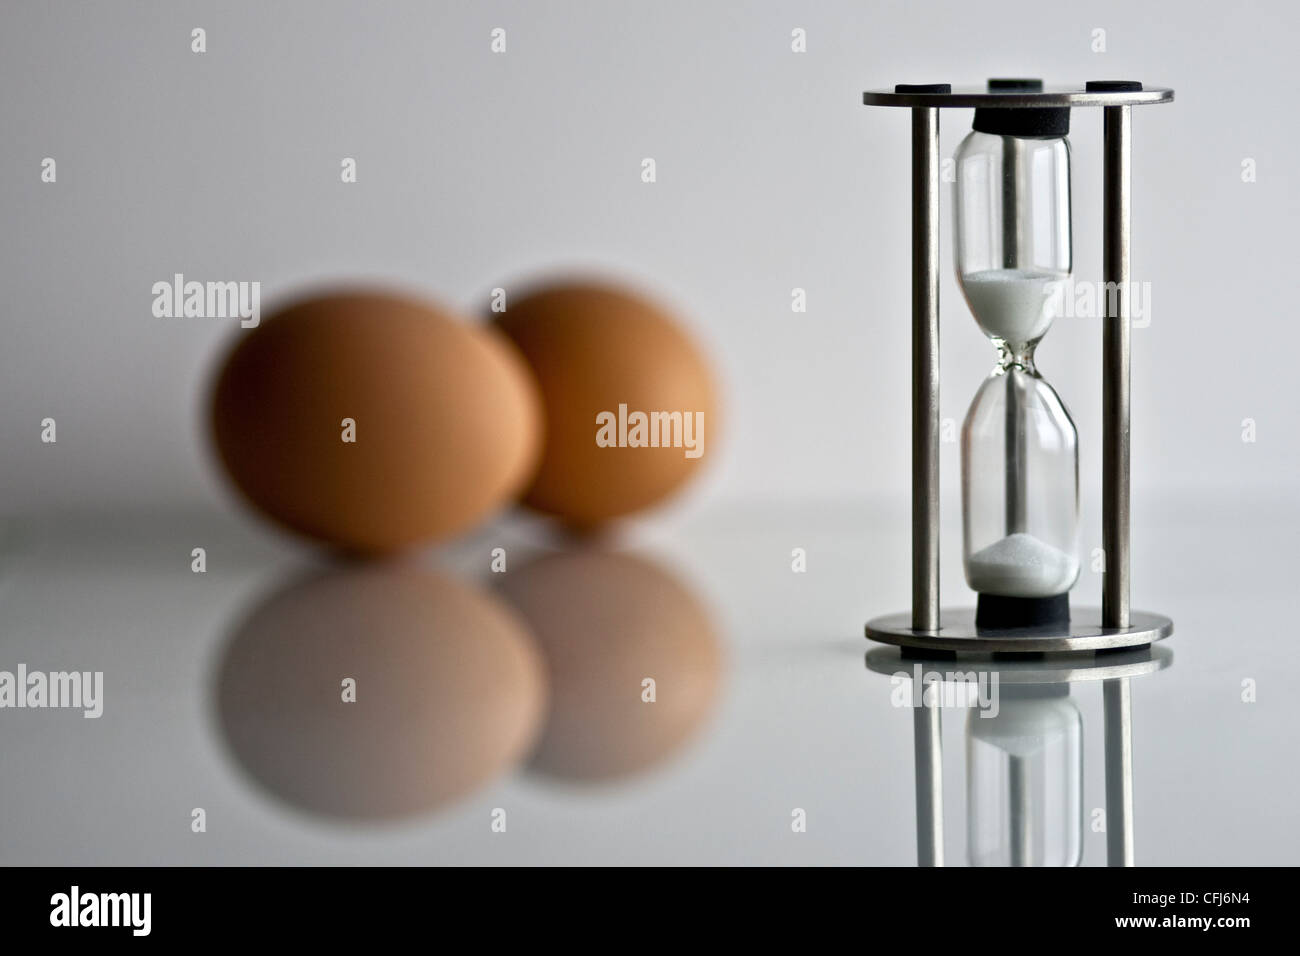 Eggs and an egg timer on a reflective surface. Stock Photo